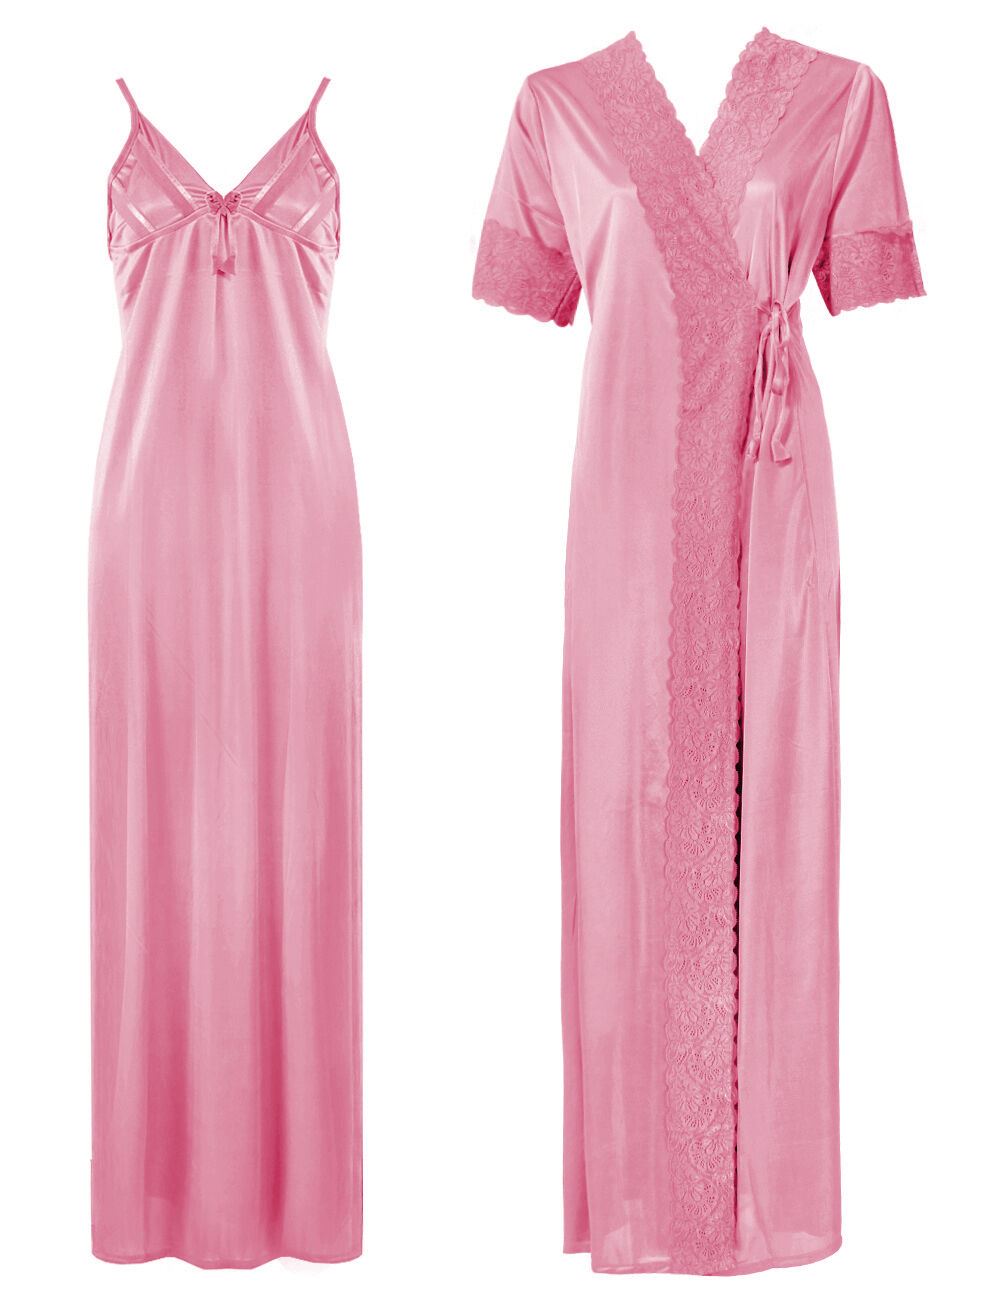 Baby Pink / One Size: Regular Satin Long Strappy Nighty and Robe 2 Pcs Set The Orange Tags